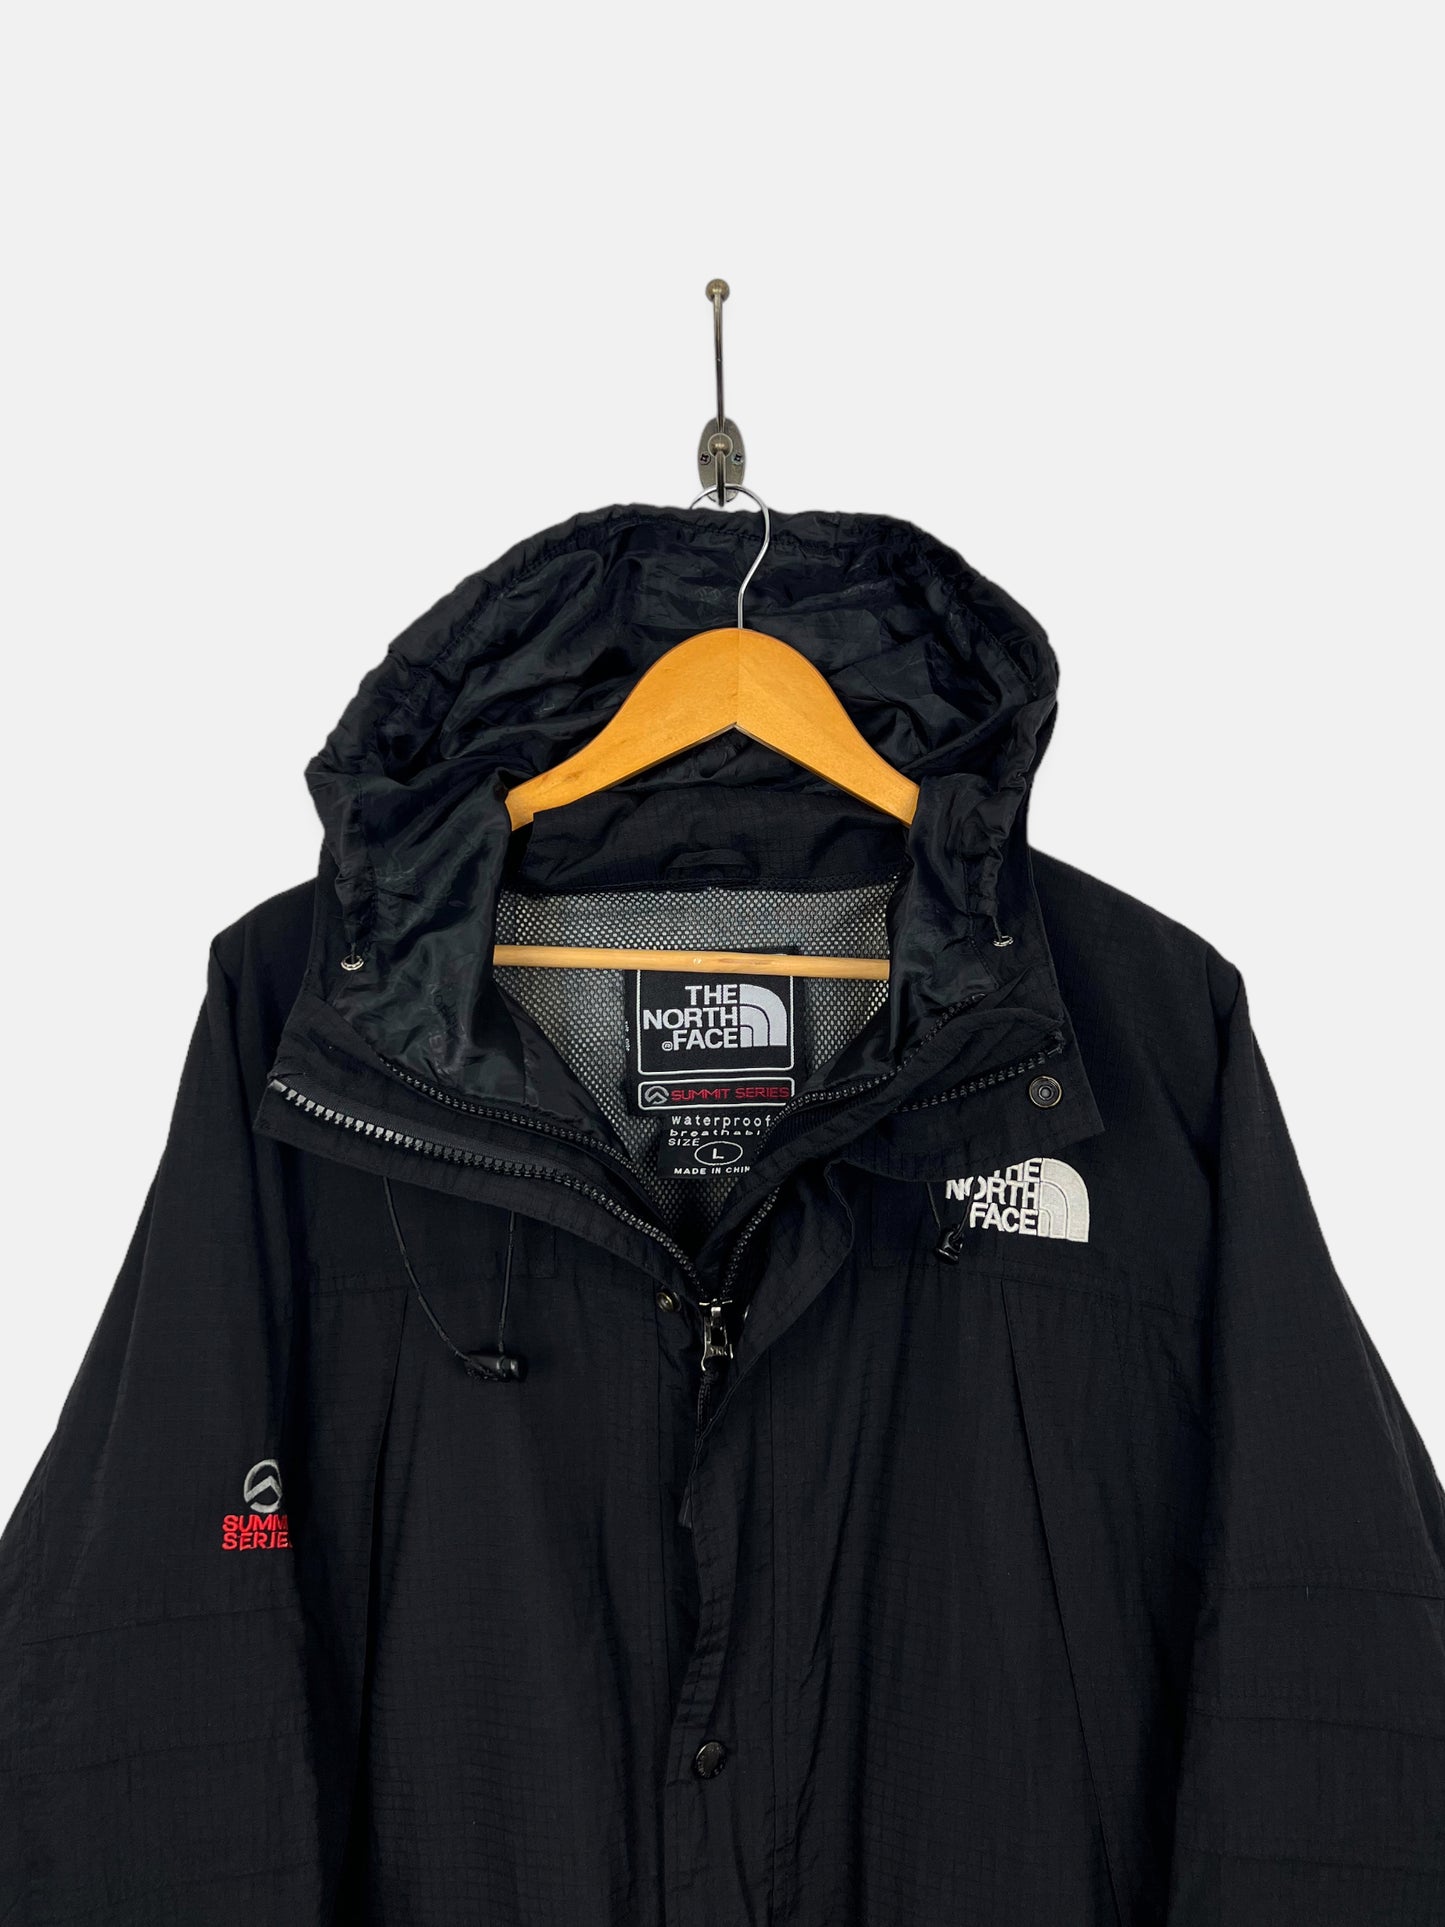 The North Face Gore-Tex Summit Series Embroidered Vintage Jacket Size XL